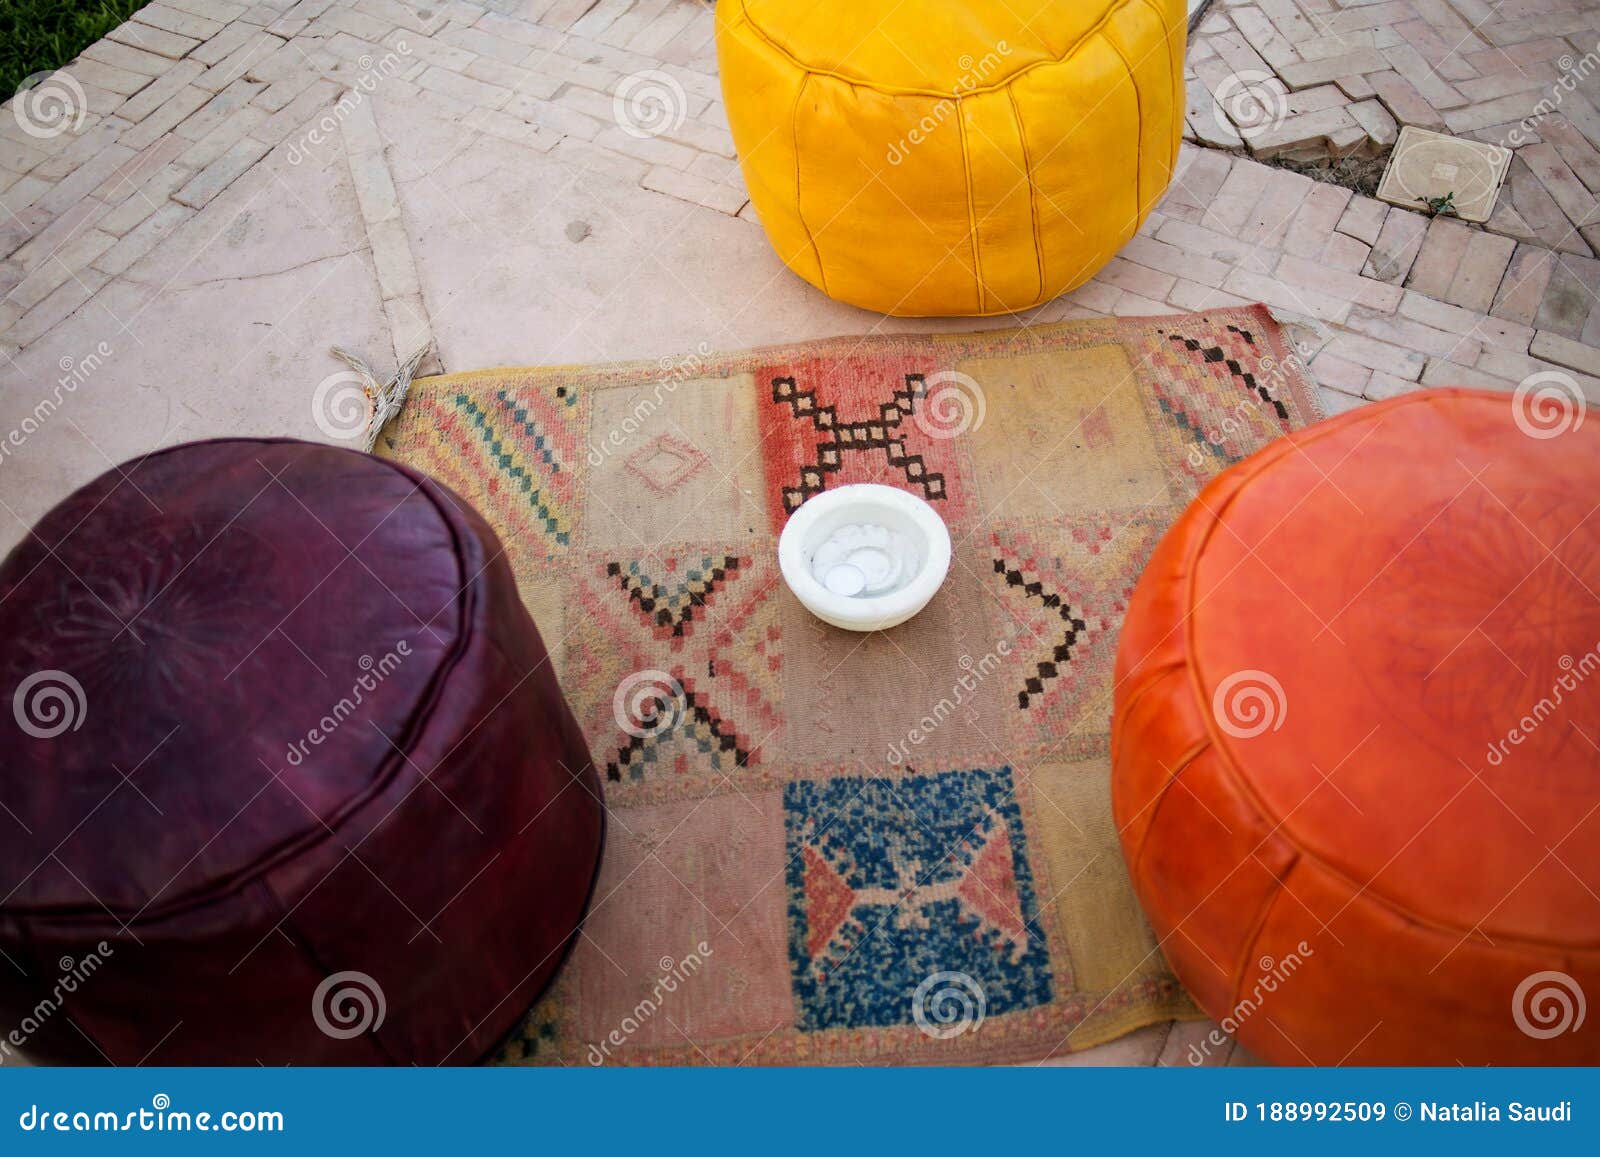 moroccan traditional poufs, moroccan decor